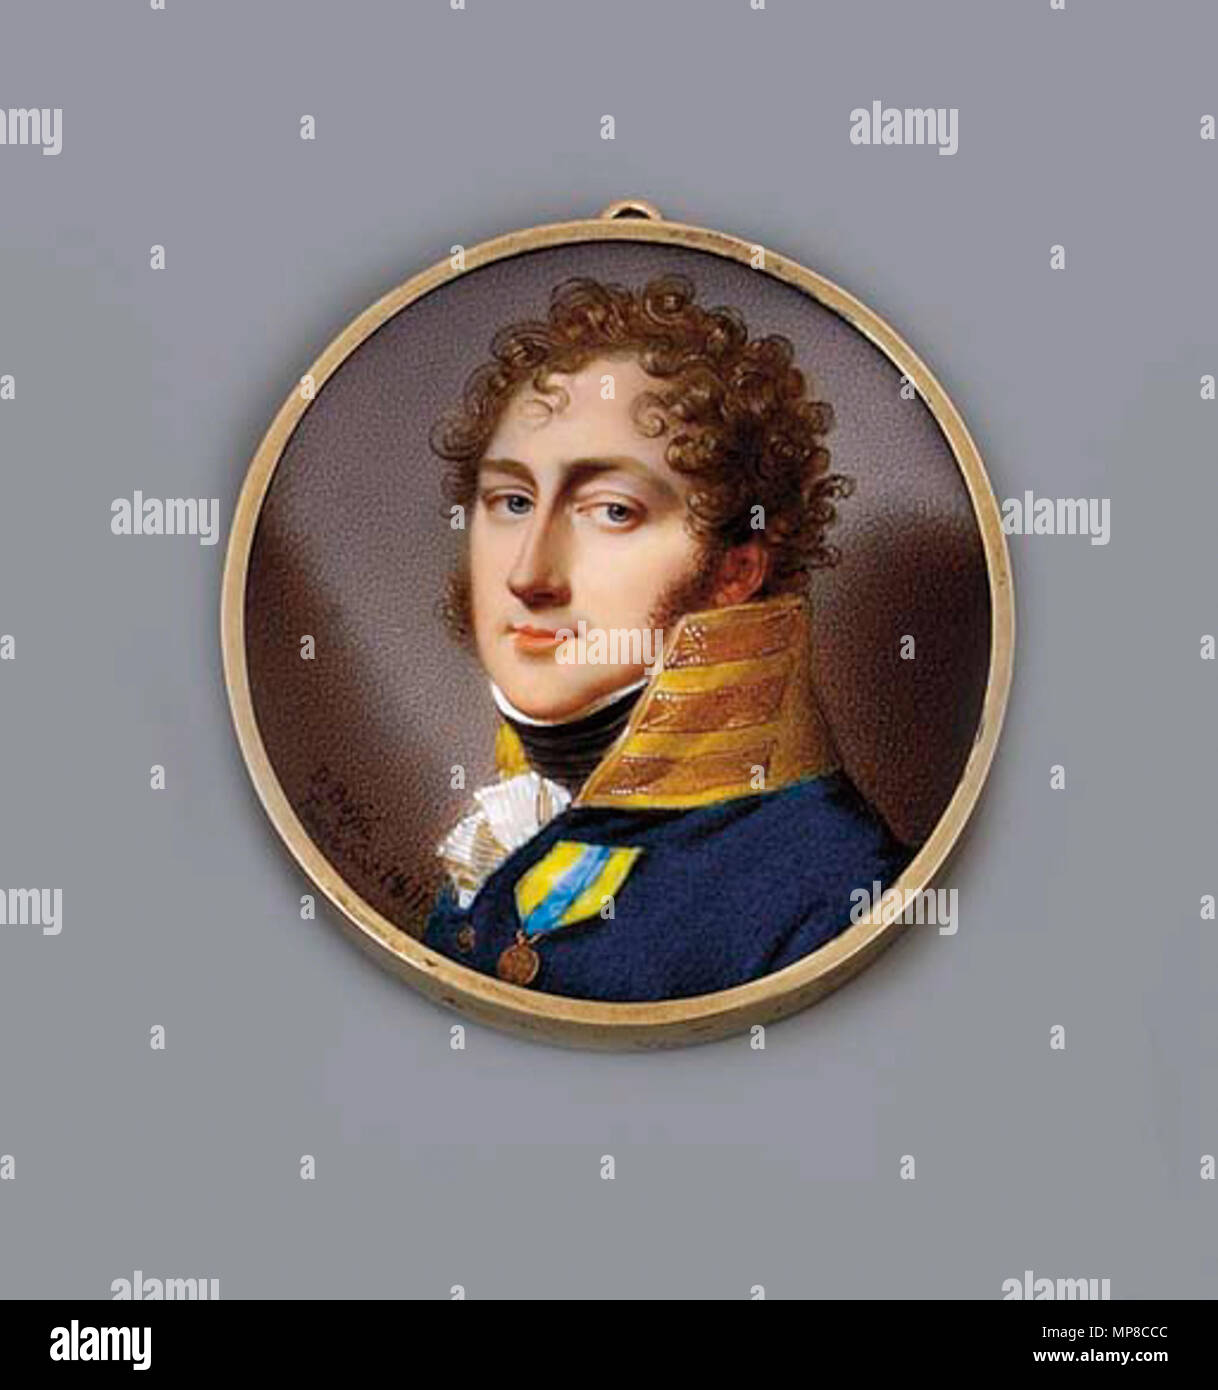 . Count Johan Otto Wrangel af Sauss (1777-1847), facing left in blue uniform with gold-figured yellow collar, pleated white lace jabot and black stock, light brown curly hair, wearing the badge of the Royal Swedish Campaign medal . 1811.   723 Johan Otto Wrangel af Sauss by D.Bossi Stock Photo